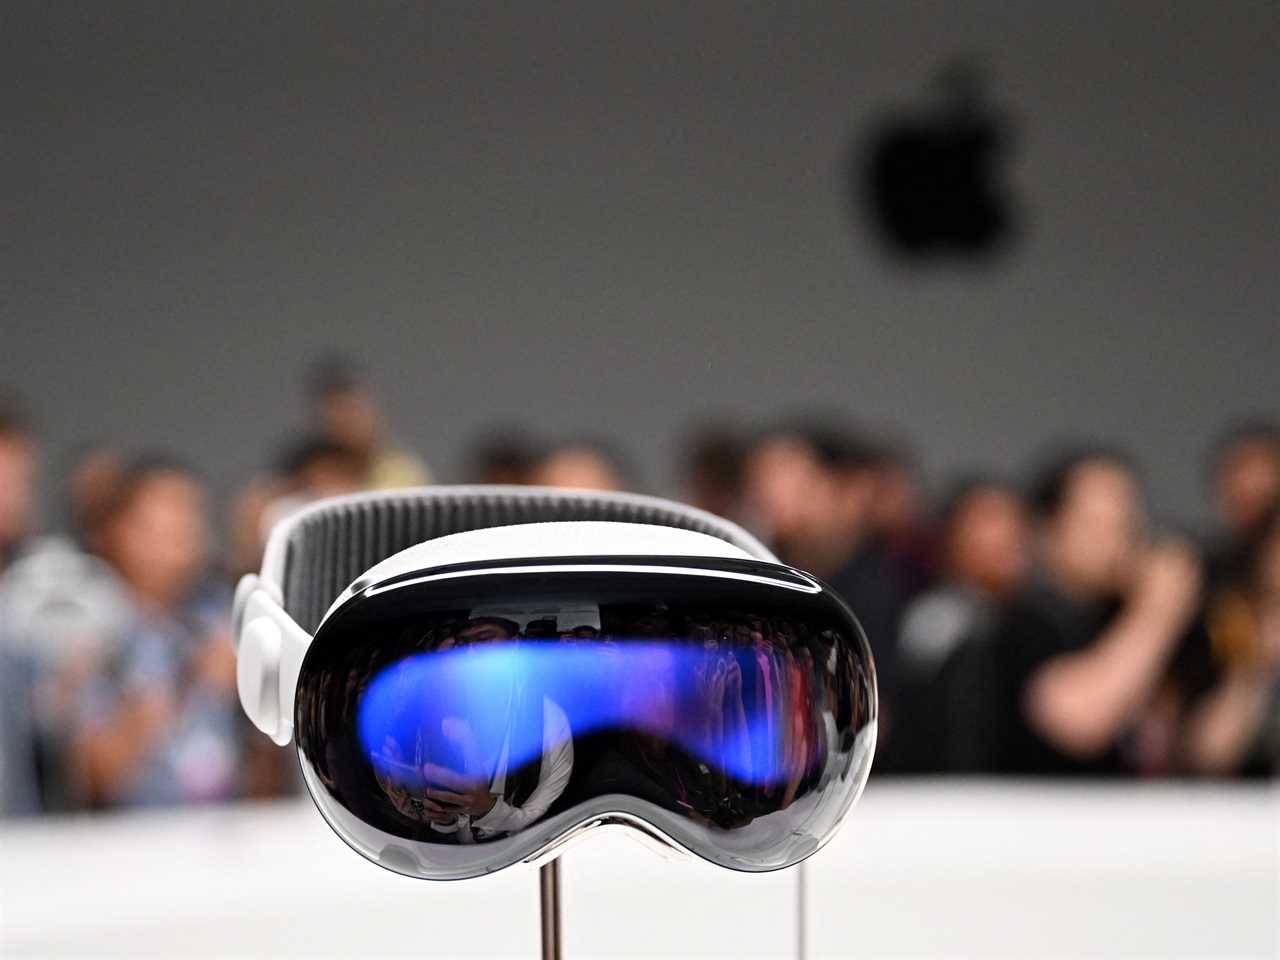 Apple Vision Pro headset on display in Cupertino, California